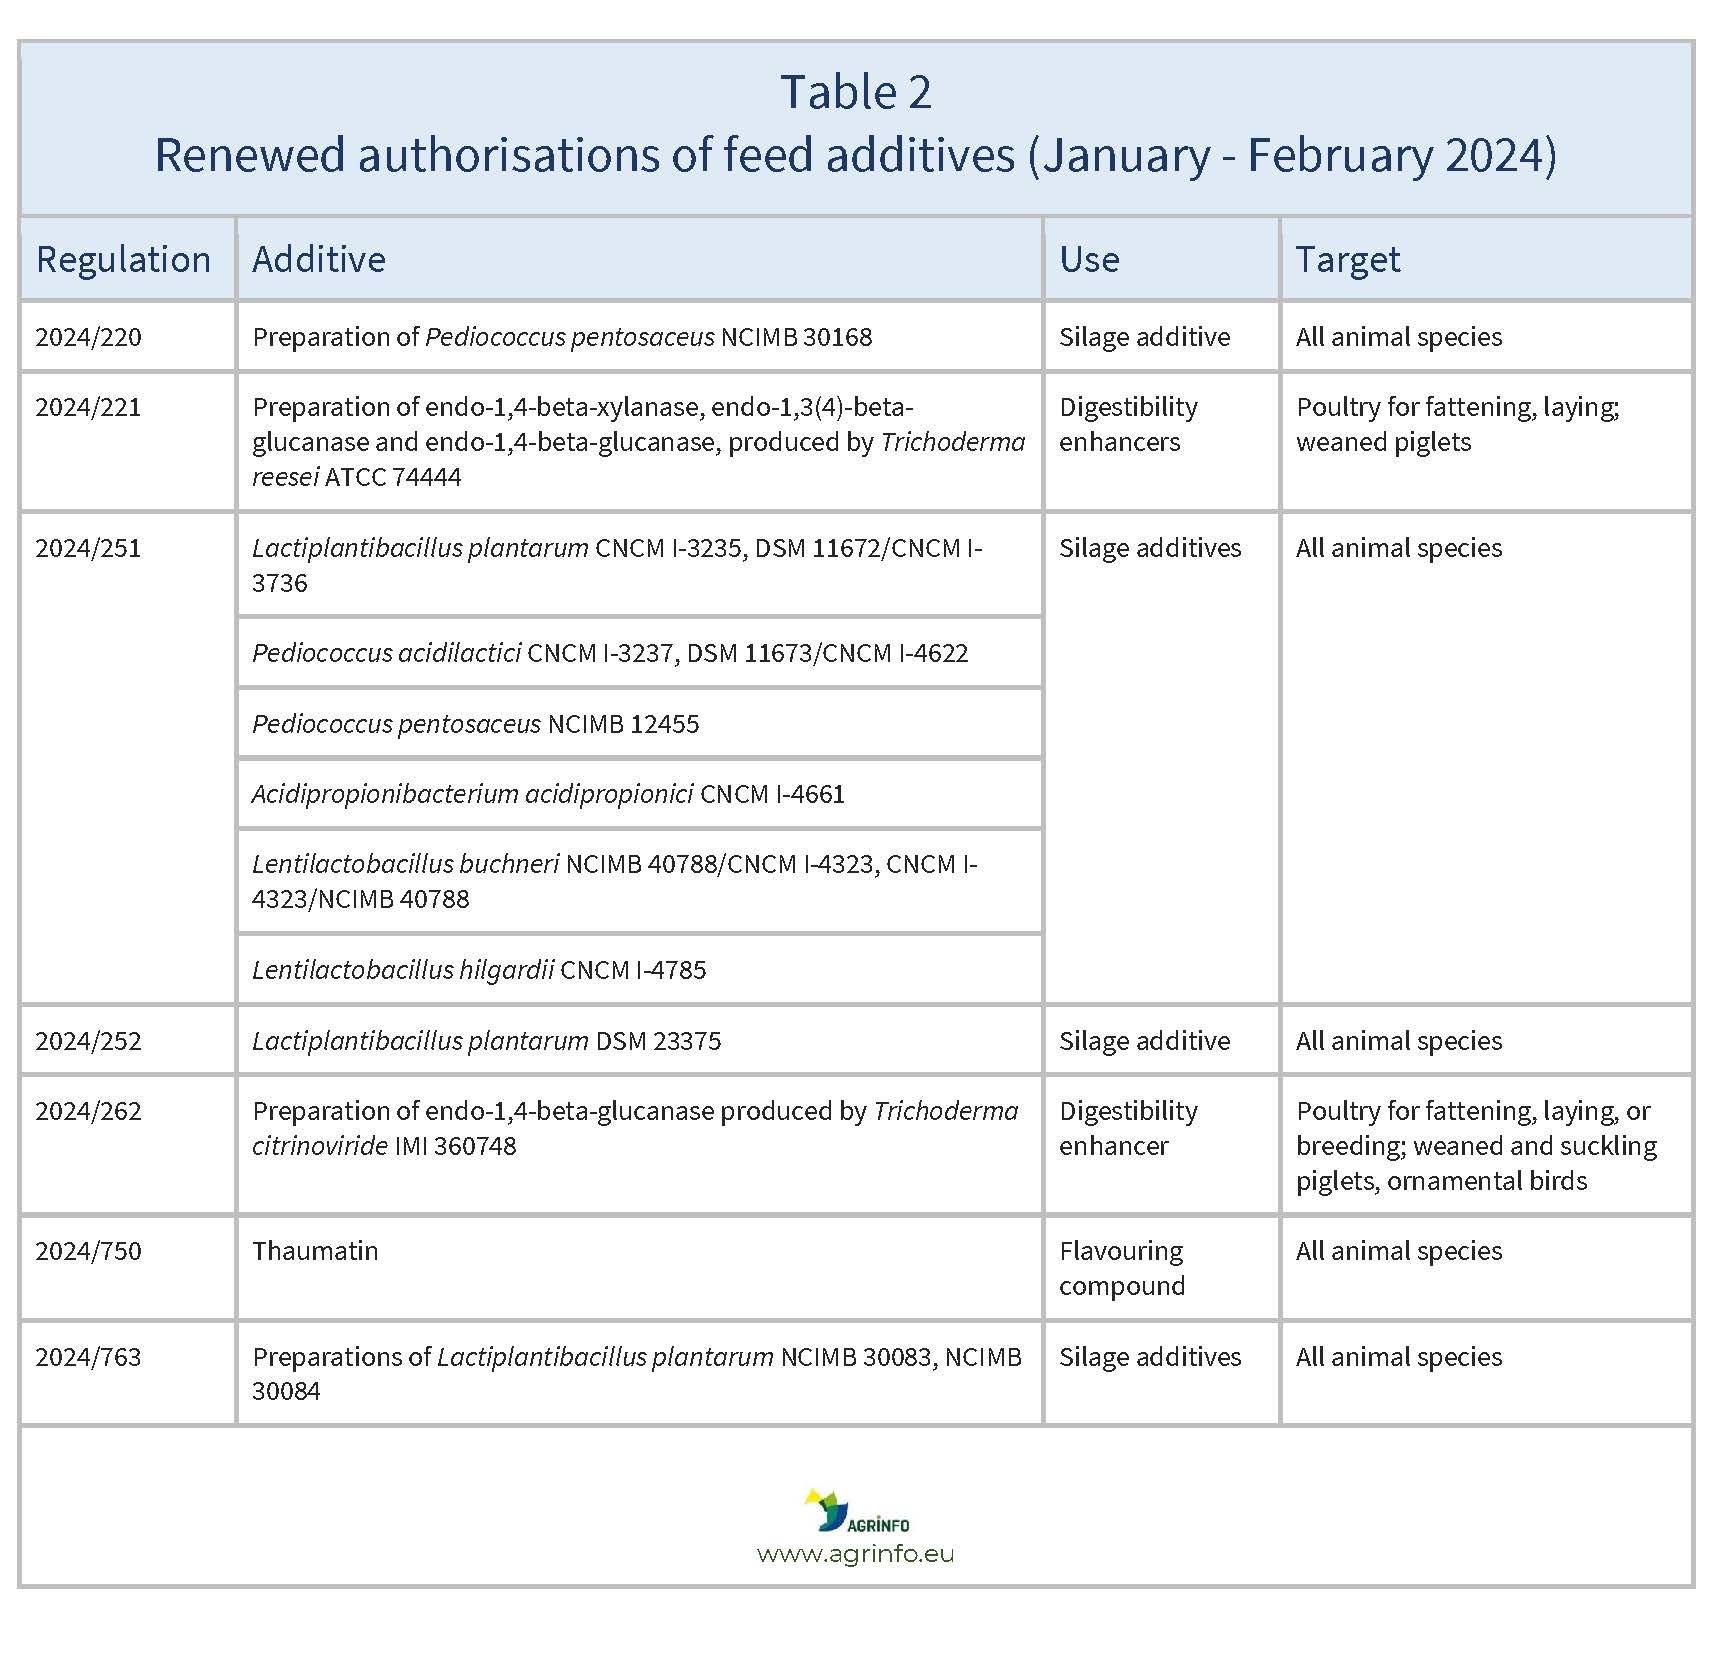 AG00403 Feed additives Jan-Feb_2024_Table2_Page_1